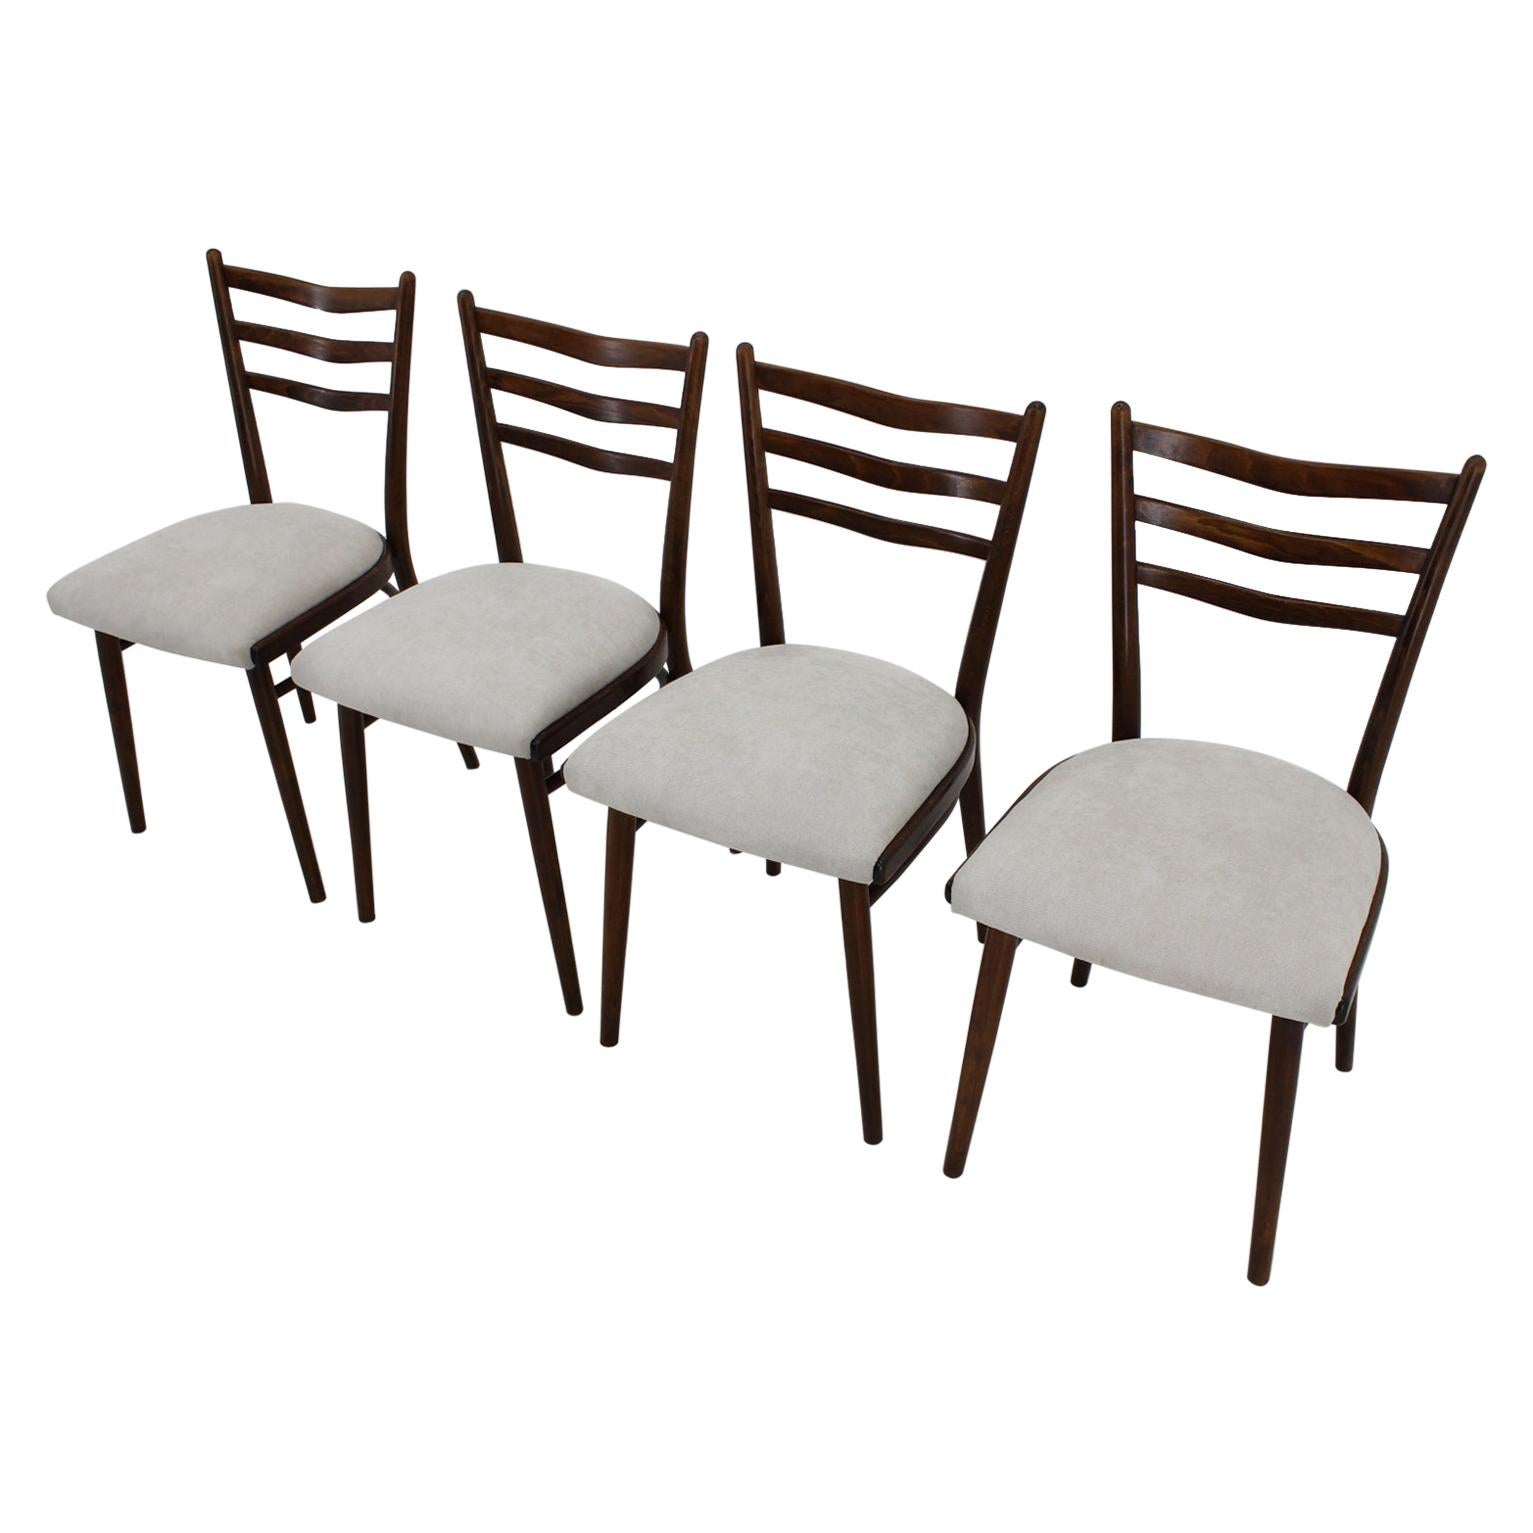 Set of Four Dining Chair by Interier Praha, 1970s